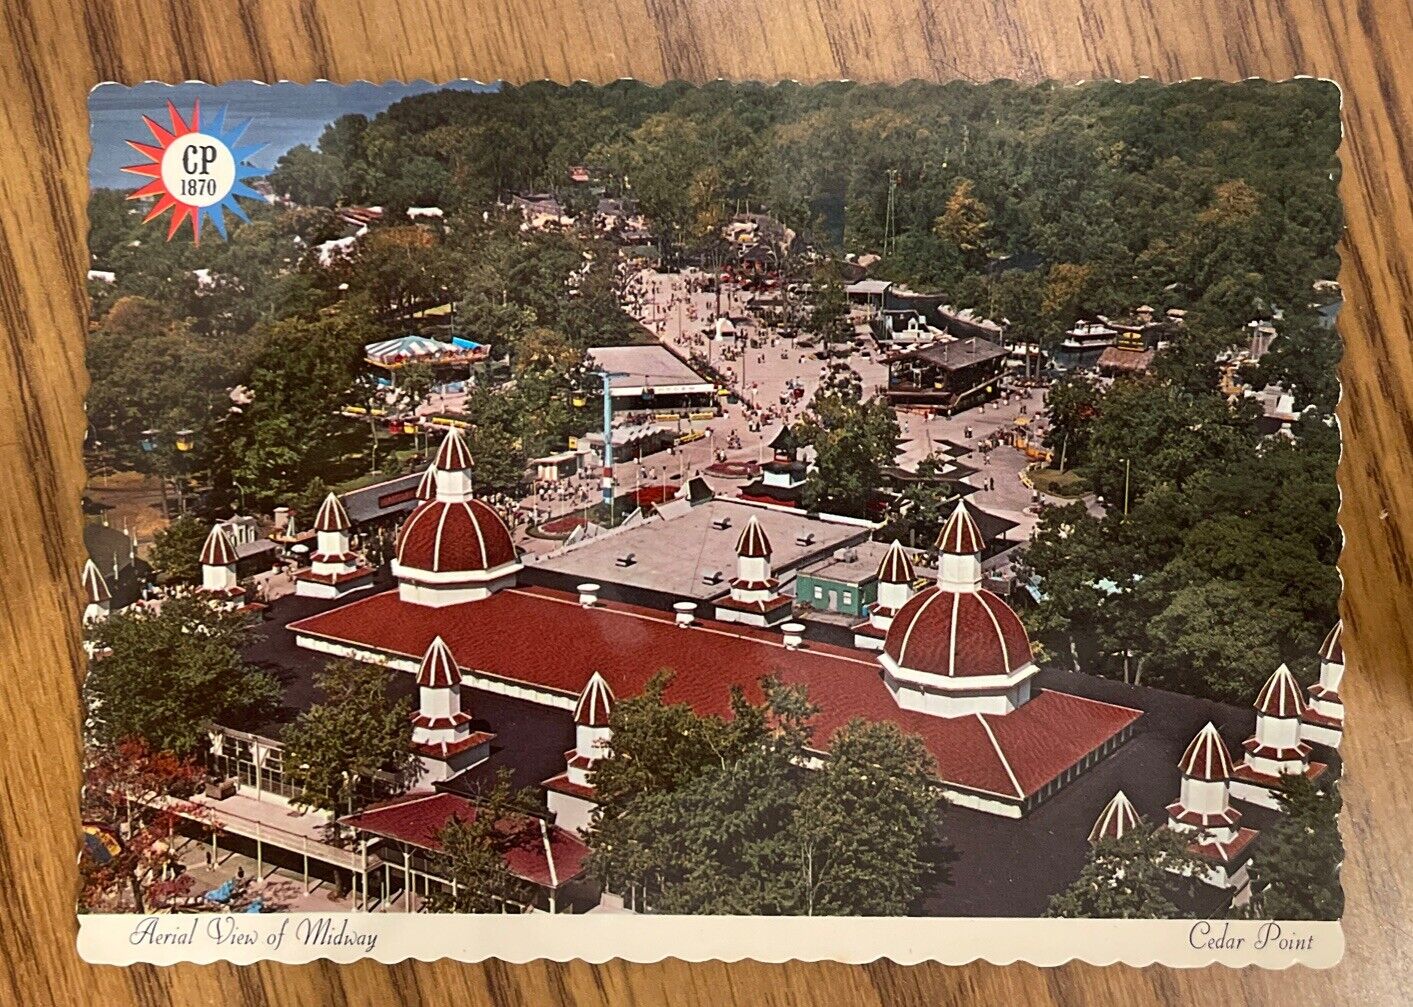 Vintage Cedar Point Arial View Of Midway Postcard Un-used